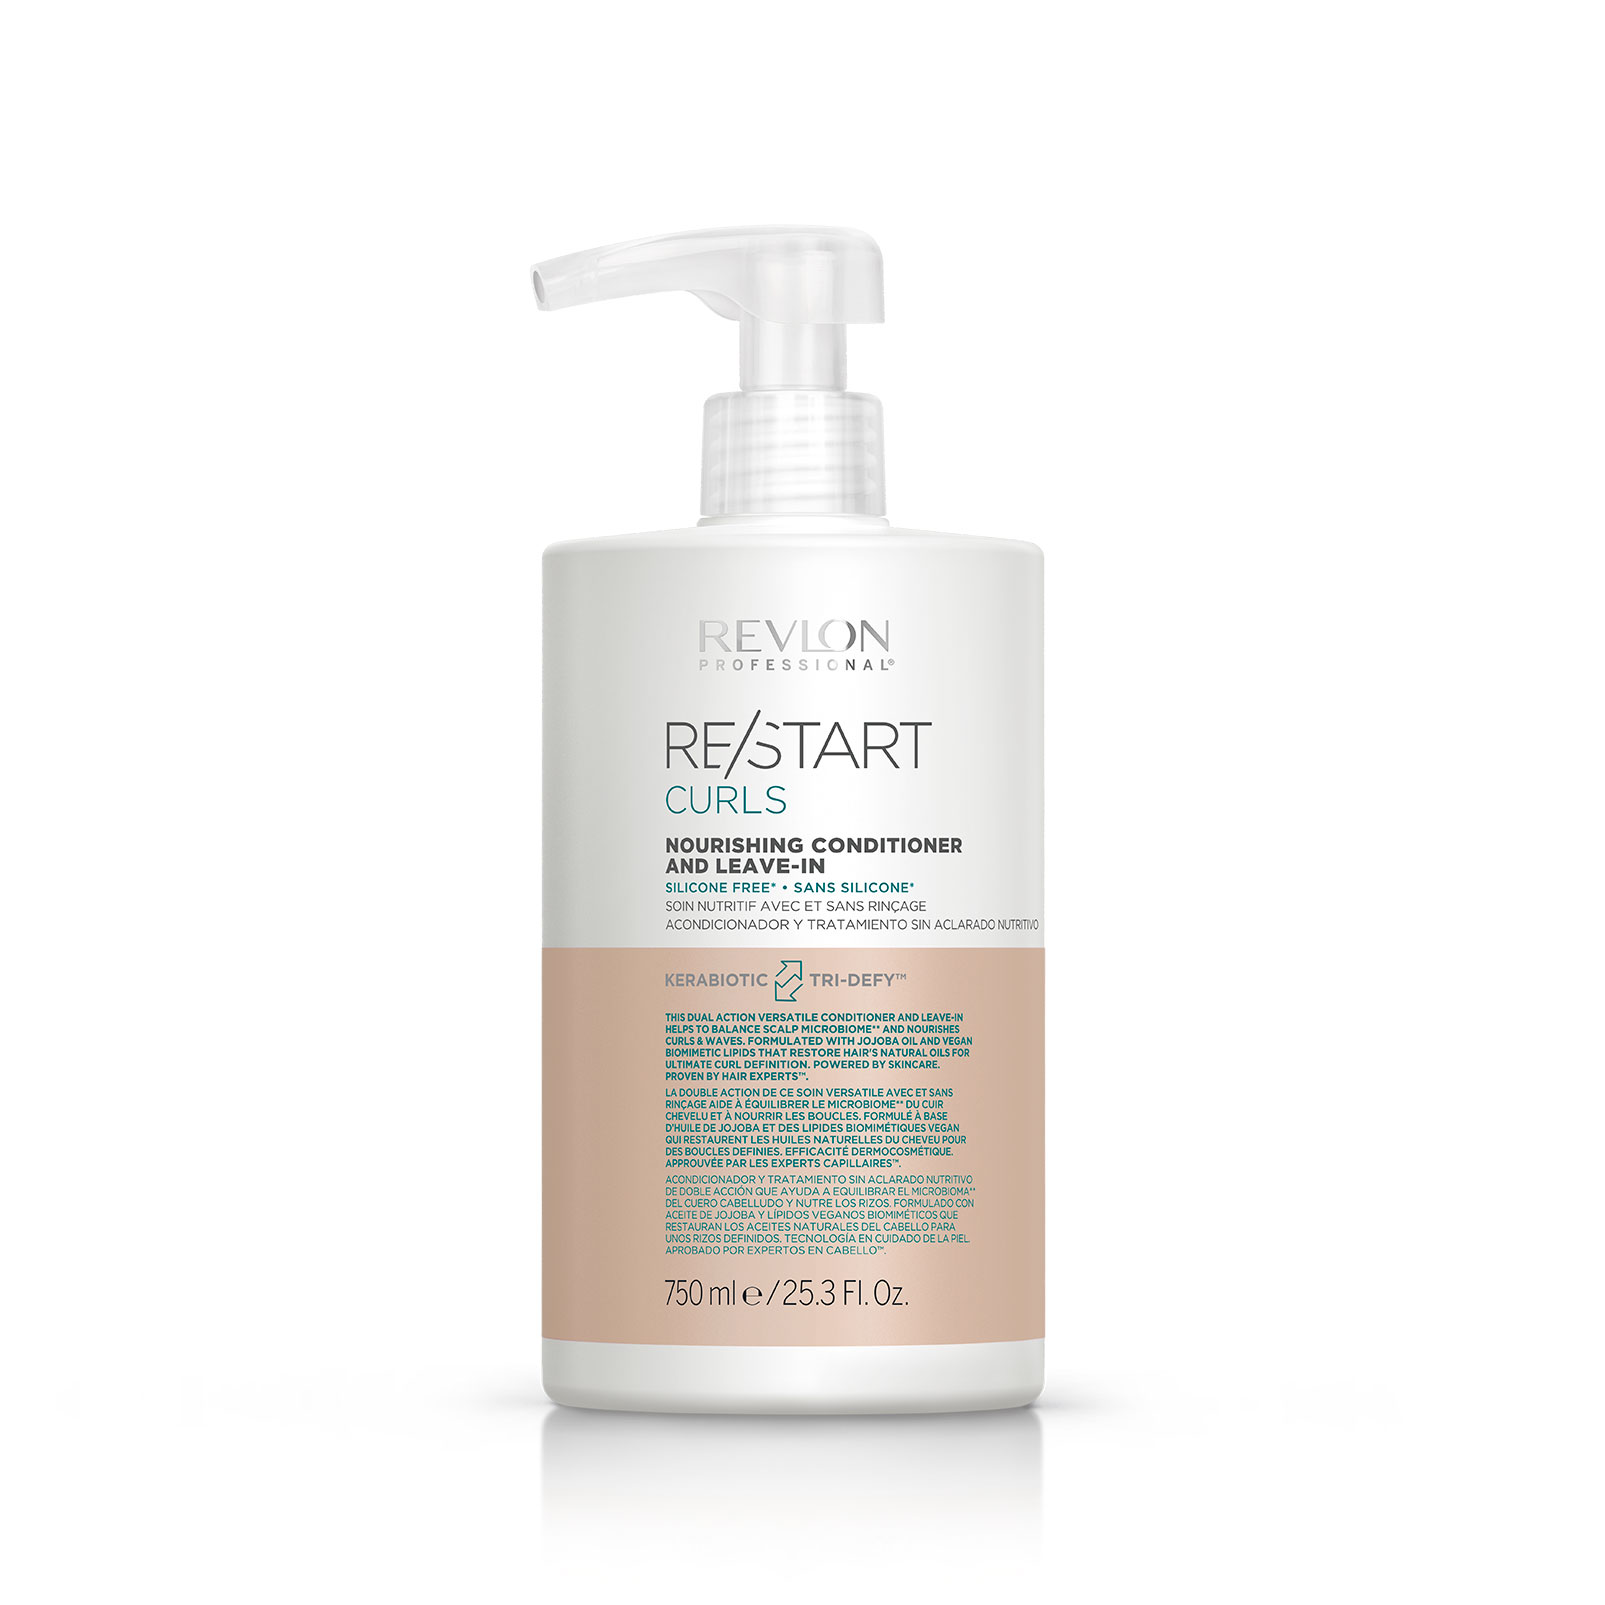 RE/START™ conditioner - for Professional curly hair Revlon